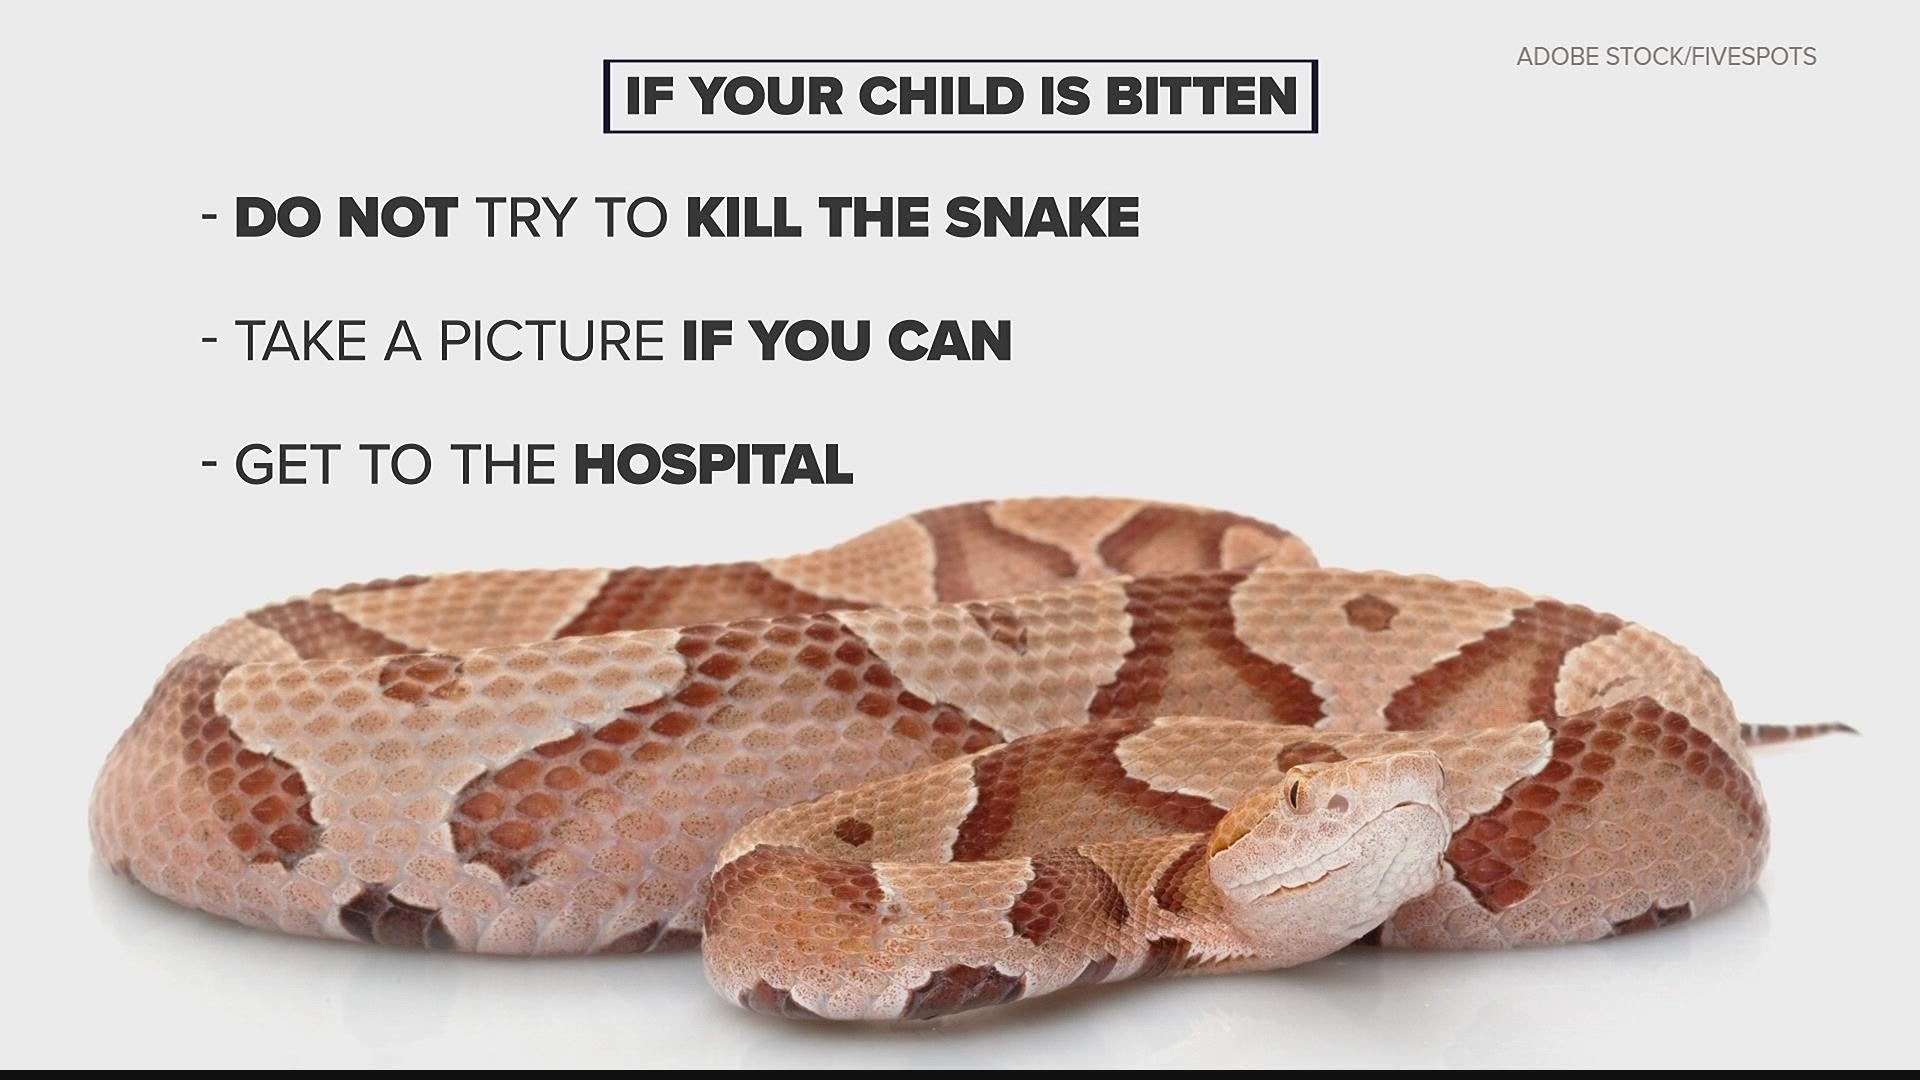 If you child has a snake bite, take them to the hospital to be checked out.